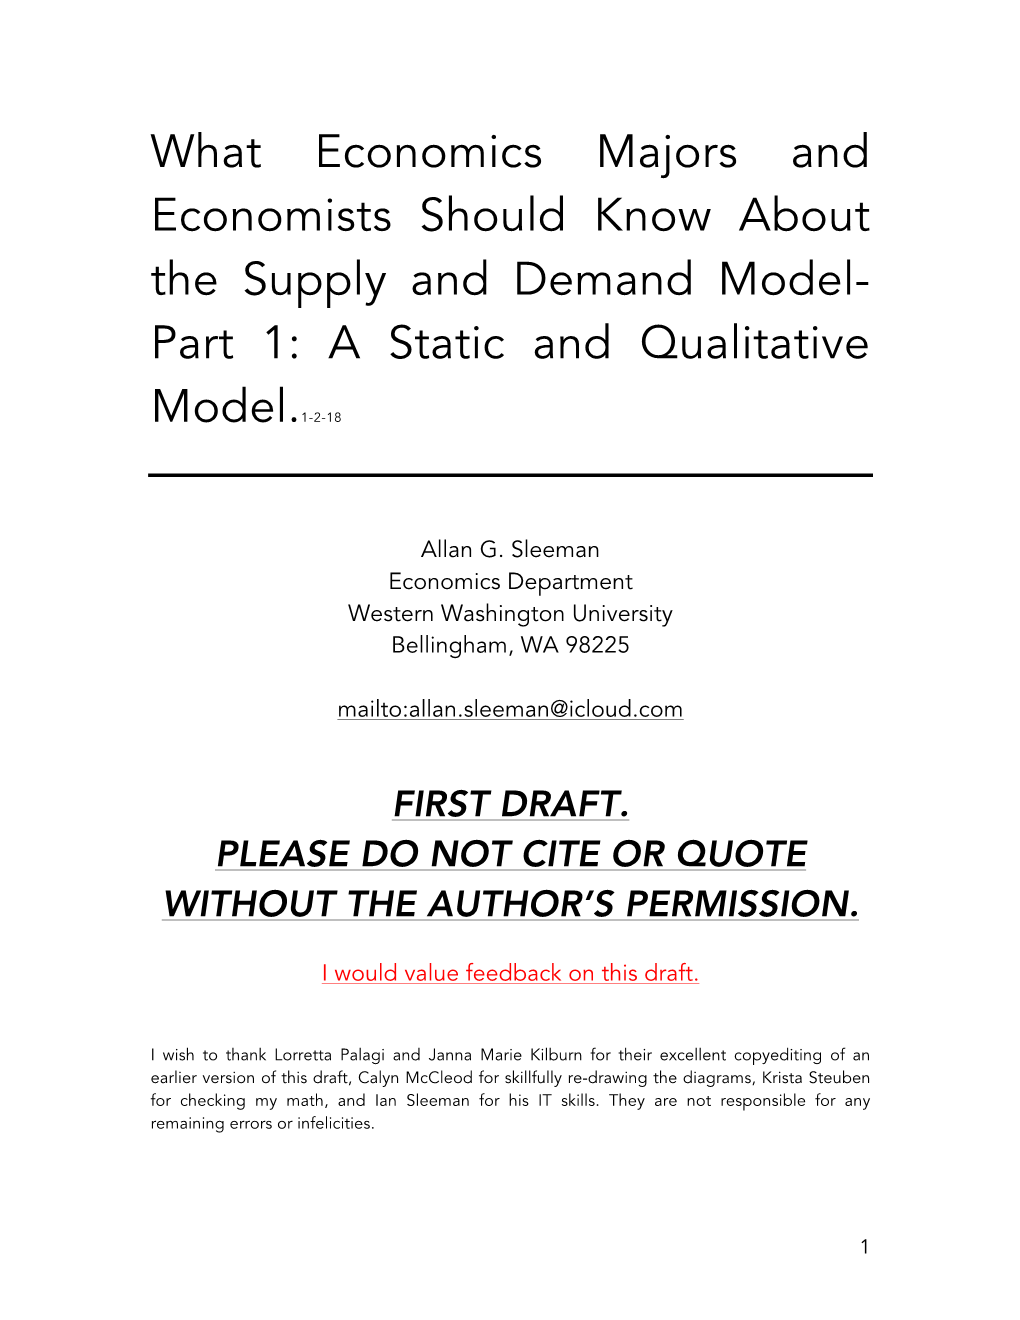 What Economics Majors and Economists Should Know About the Supply and Demand Model- Part 1: a Static and Qualitative